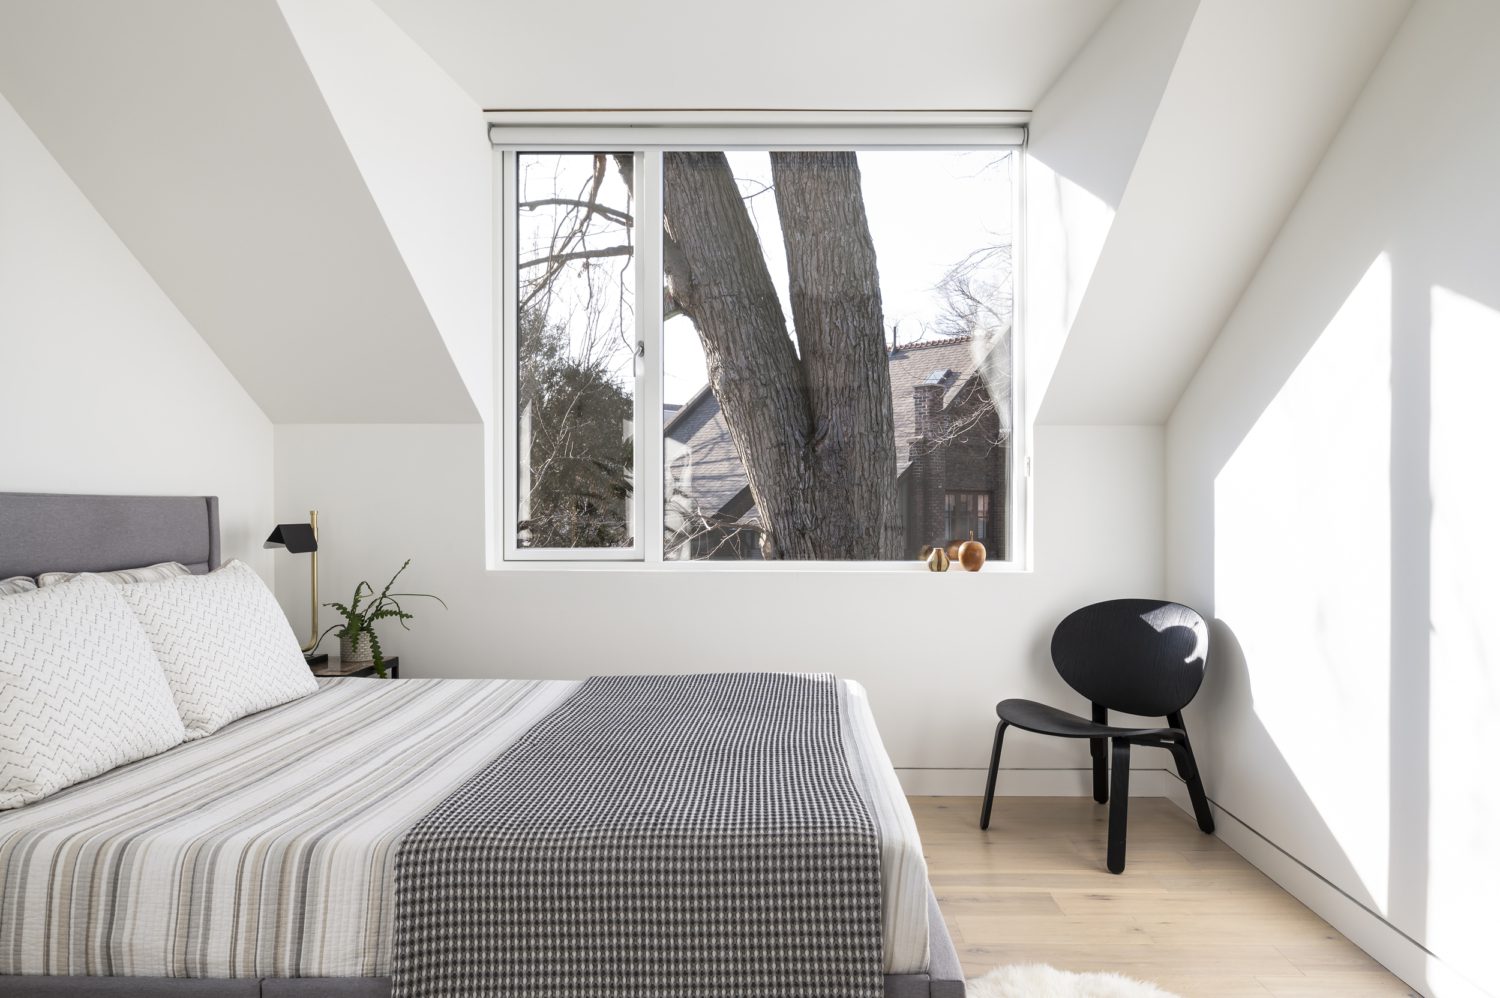 Beautiful laneway house in parkdale, Toronto. Second floor bedroom bed and window